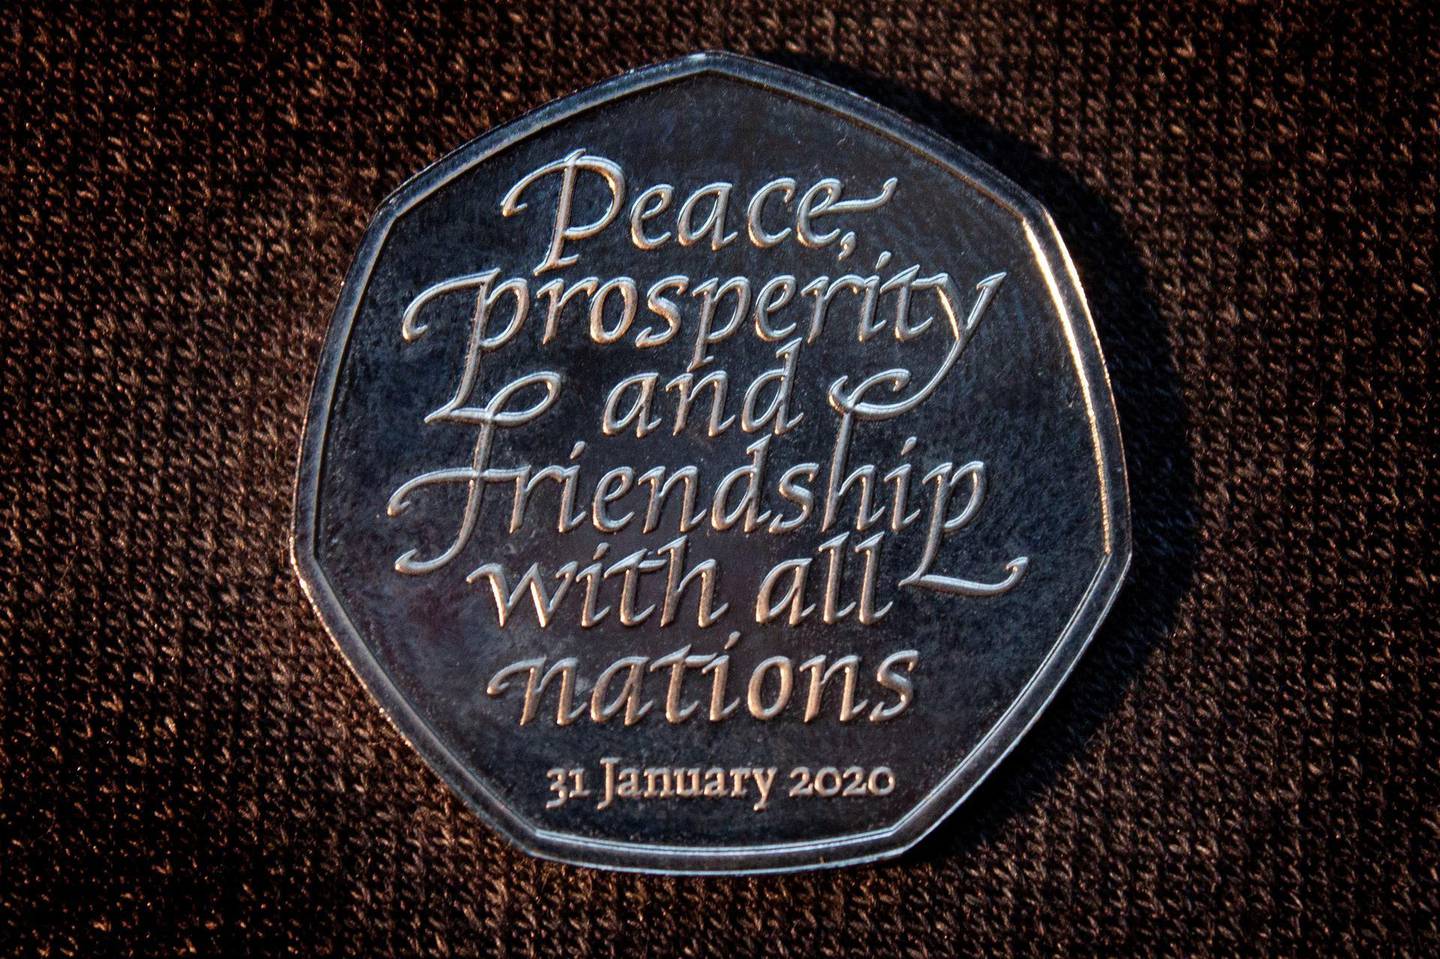 epa08175087 A undated handout photo made available by Her Majesty's Treasury on 29 January 2020, showing the new commemorative 50p Brexit coin, London, United Kingdom. The coin carries the text 'Peace, prosperity and friendship with all nations' and is due to be released 31 January, the day United Kingdom starts its withdrawal from the European Union.  EPA/Her Majesty's Treasury HANDOUT  HANDOUT EDITORIAL USE ONLY/NO SALES